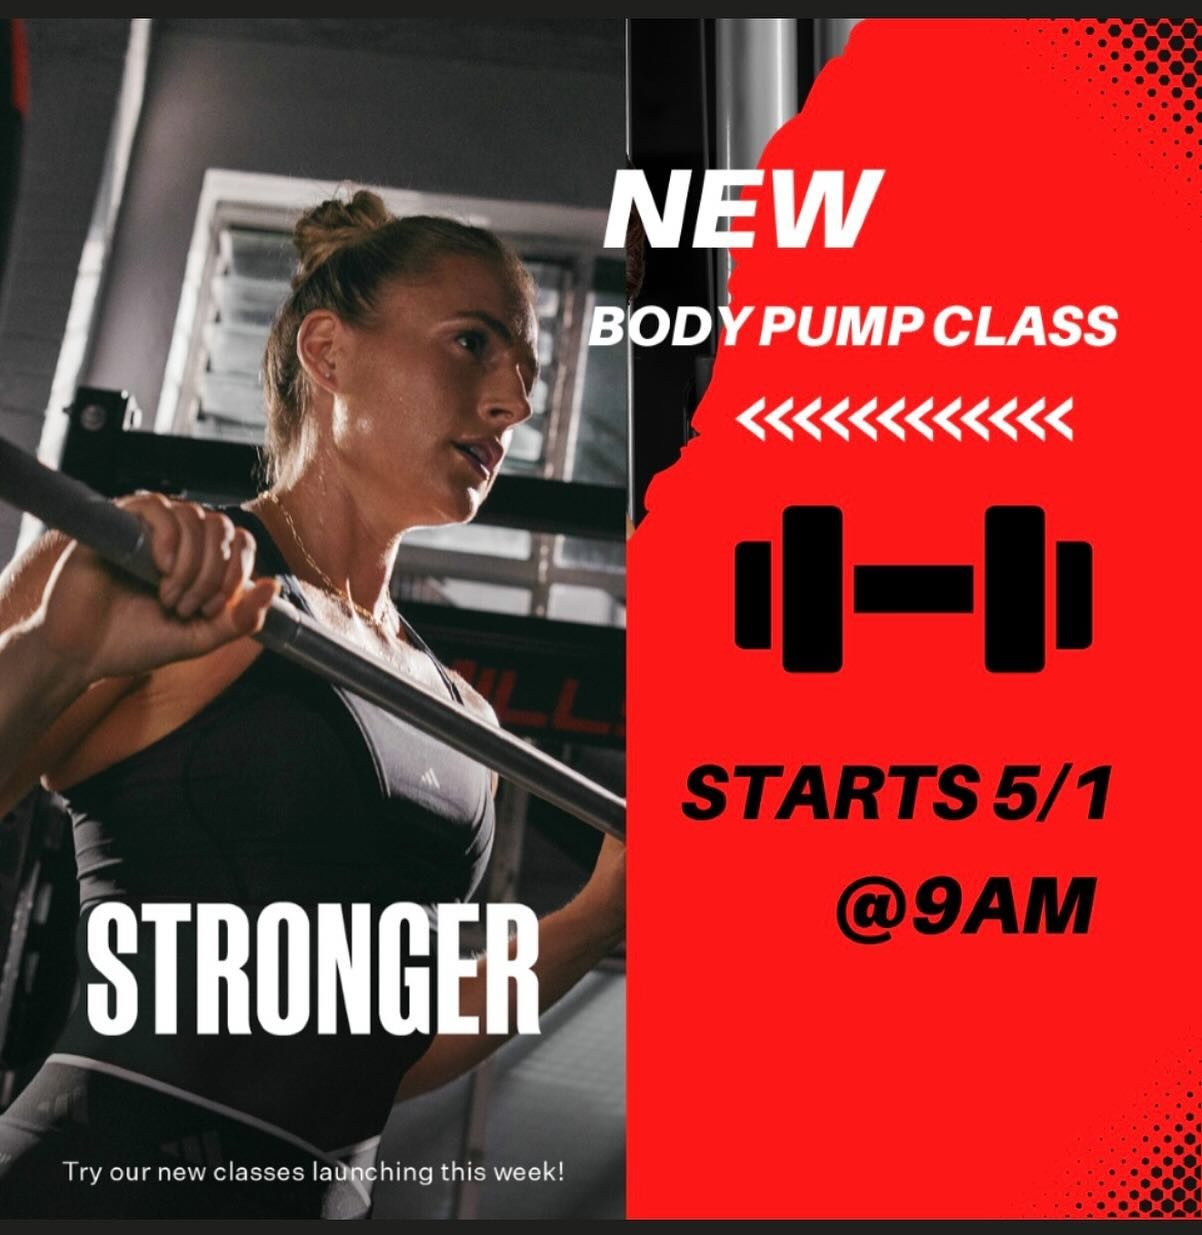 New Body Pump Class starts Wednesday, May 1st at 9am &hellip; Come in and check it out! #taosspaandtennisclub #bodypump #lesmillsinstructor #taos #groupfitness #groupfitnessinstructor